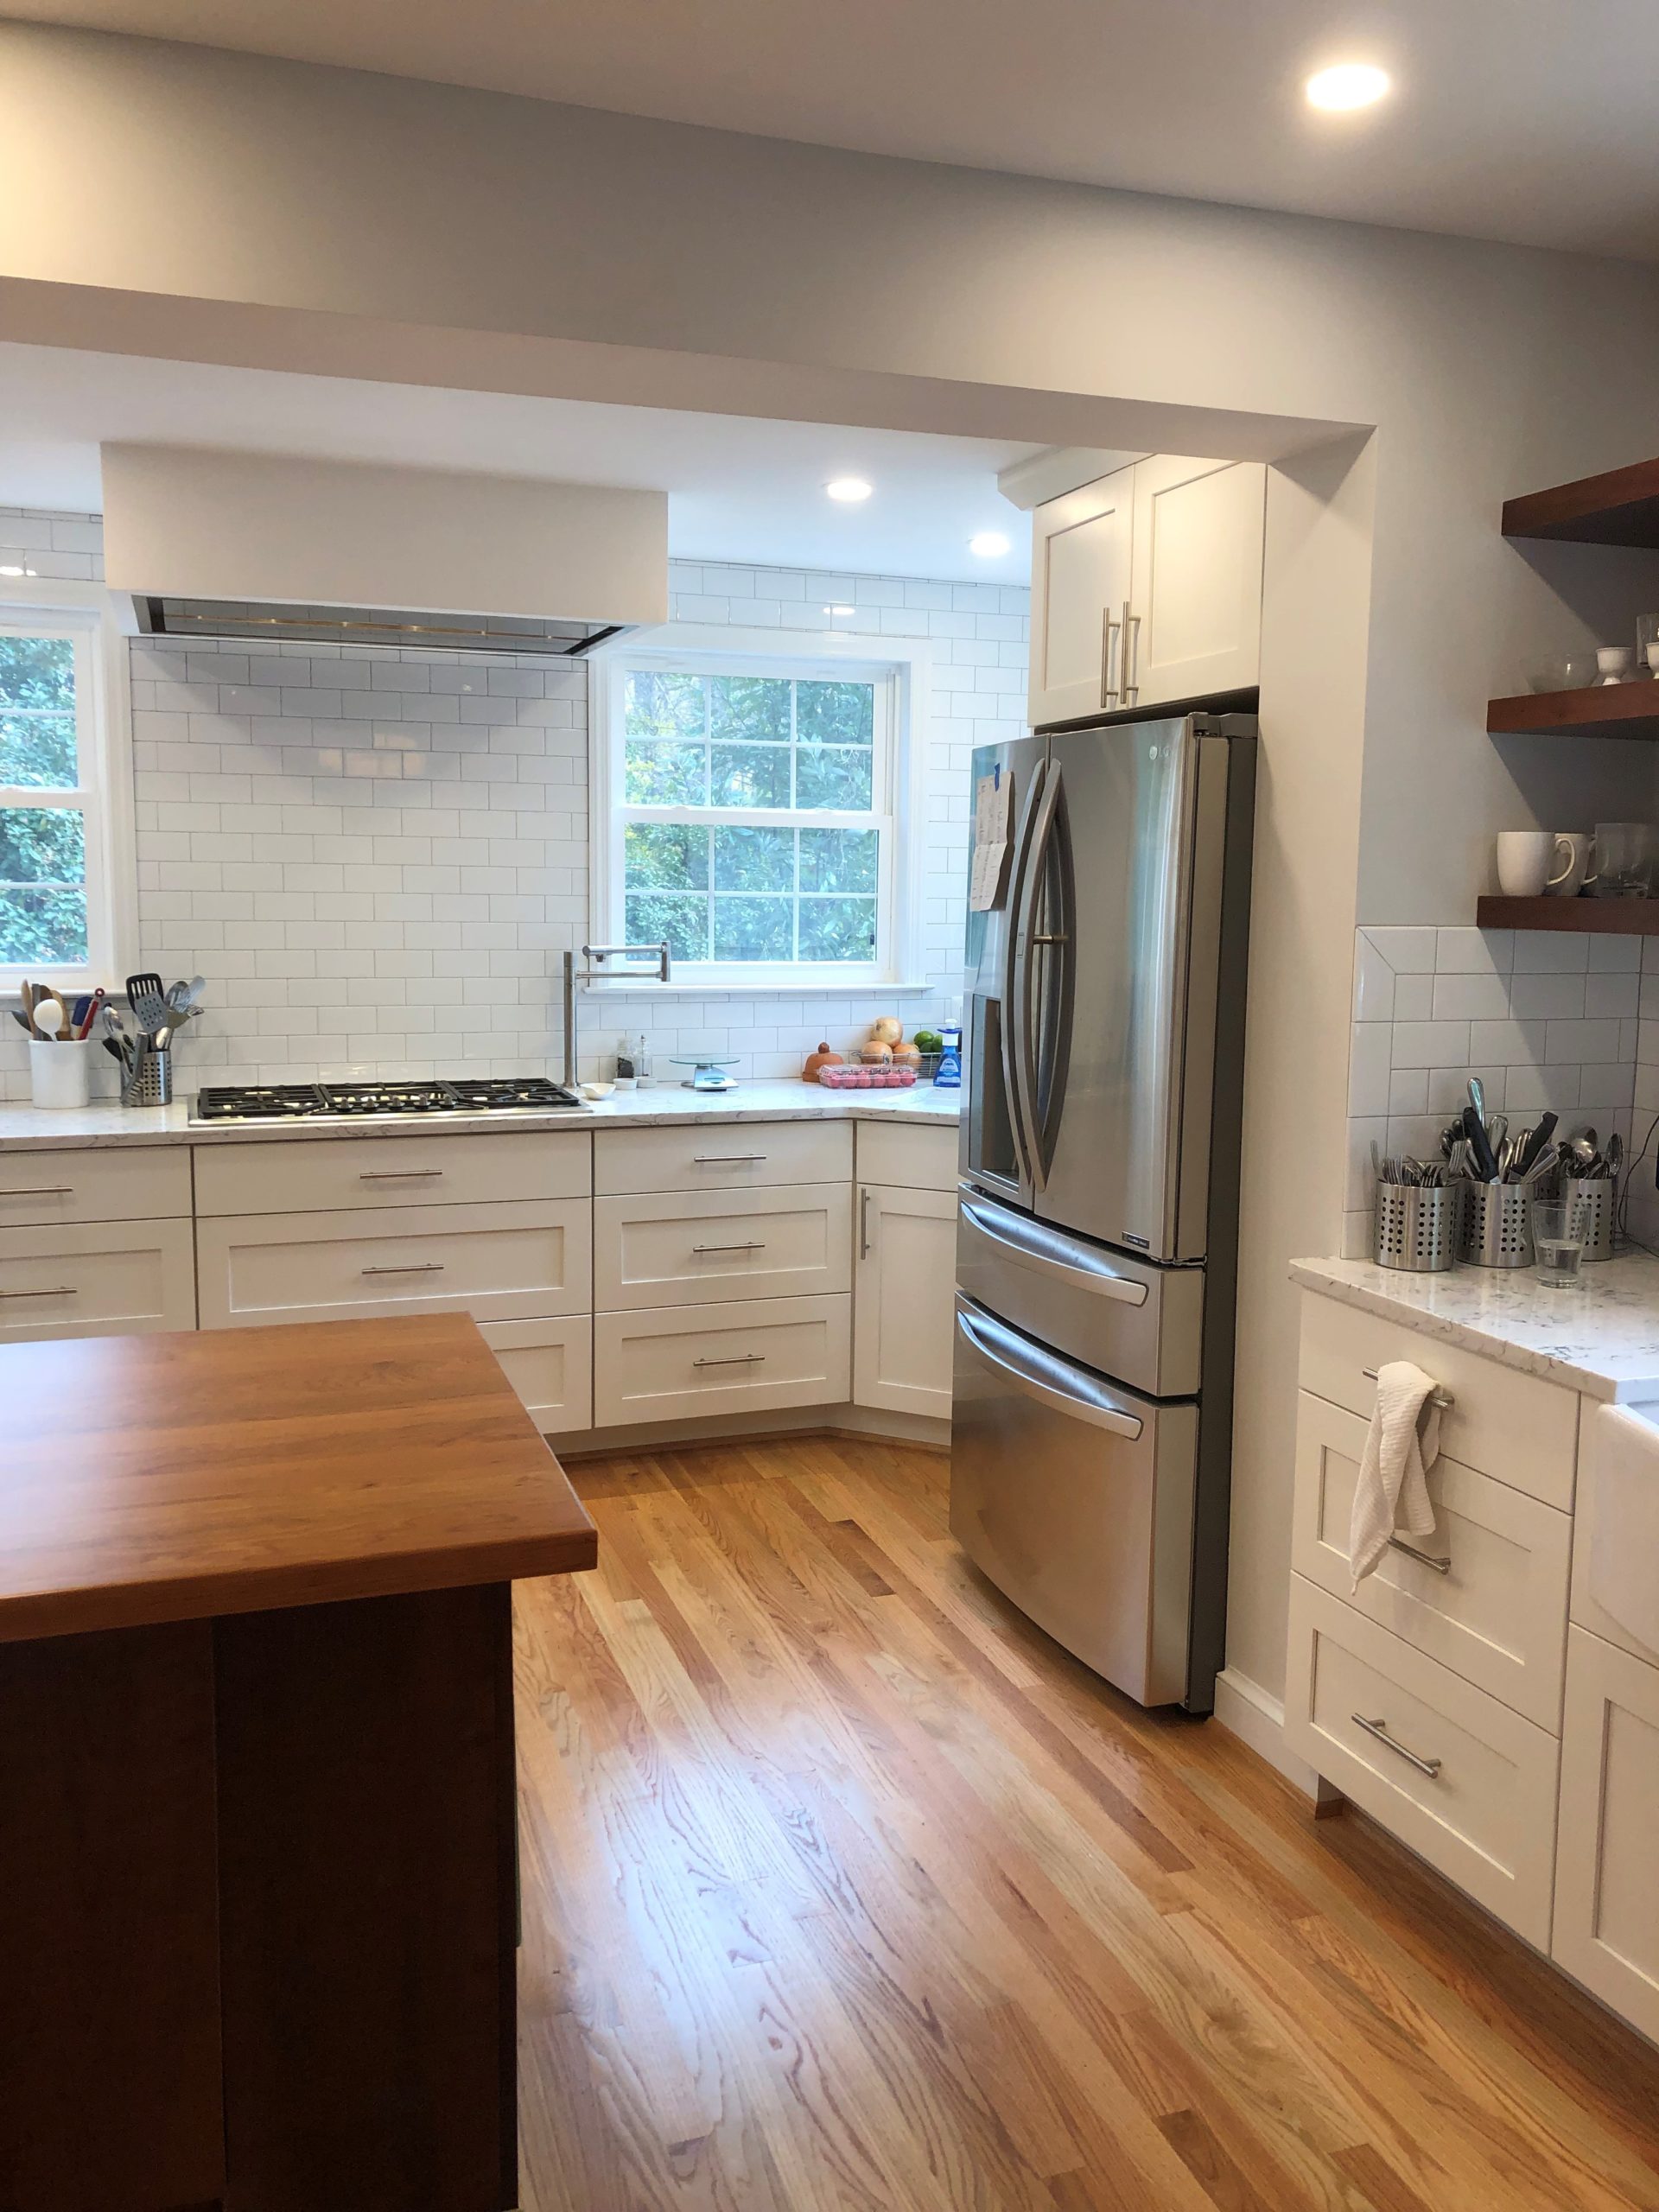 a kitchen with white cabinets, wooden counter, and stainless steel appliances